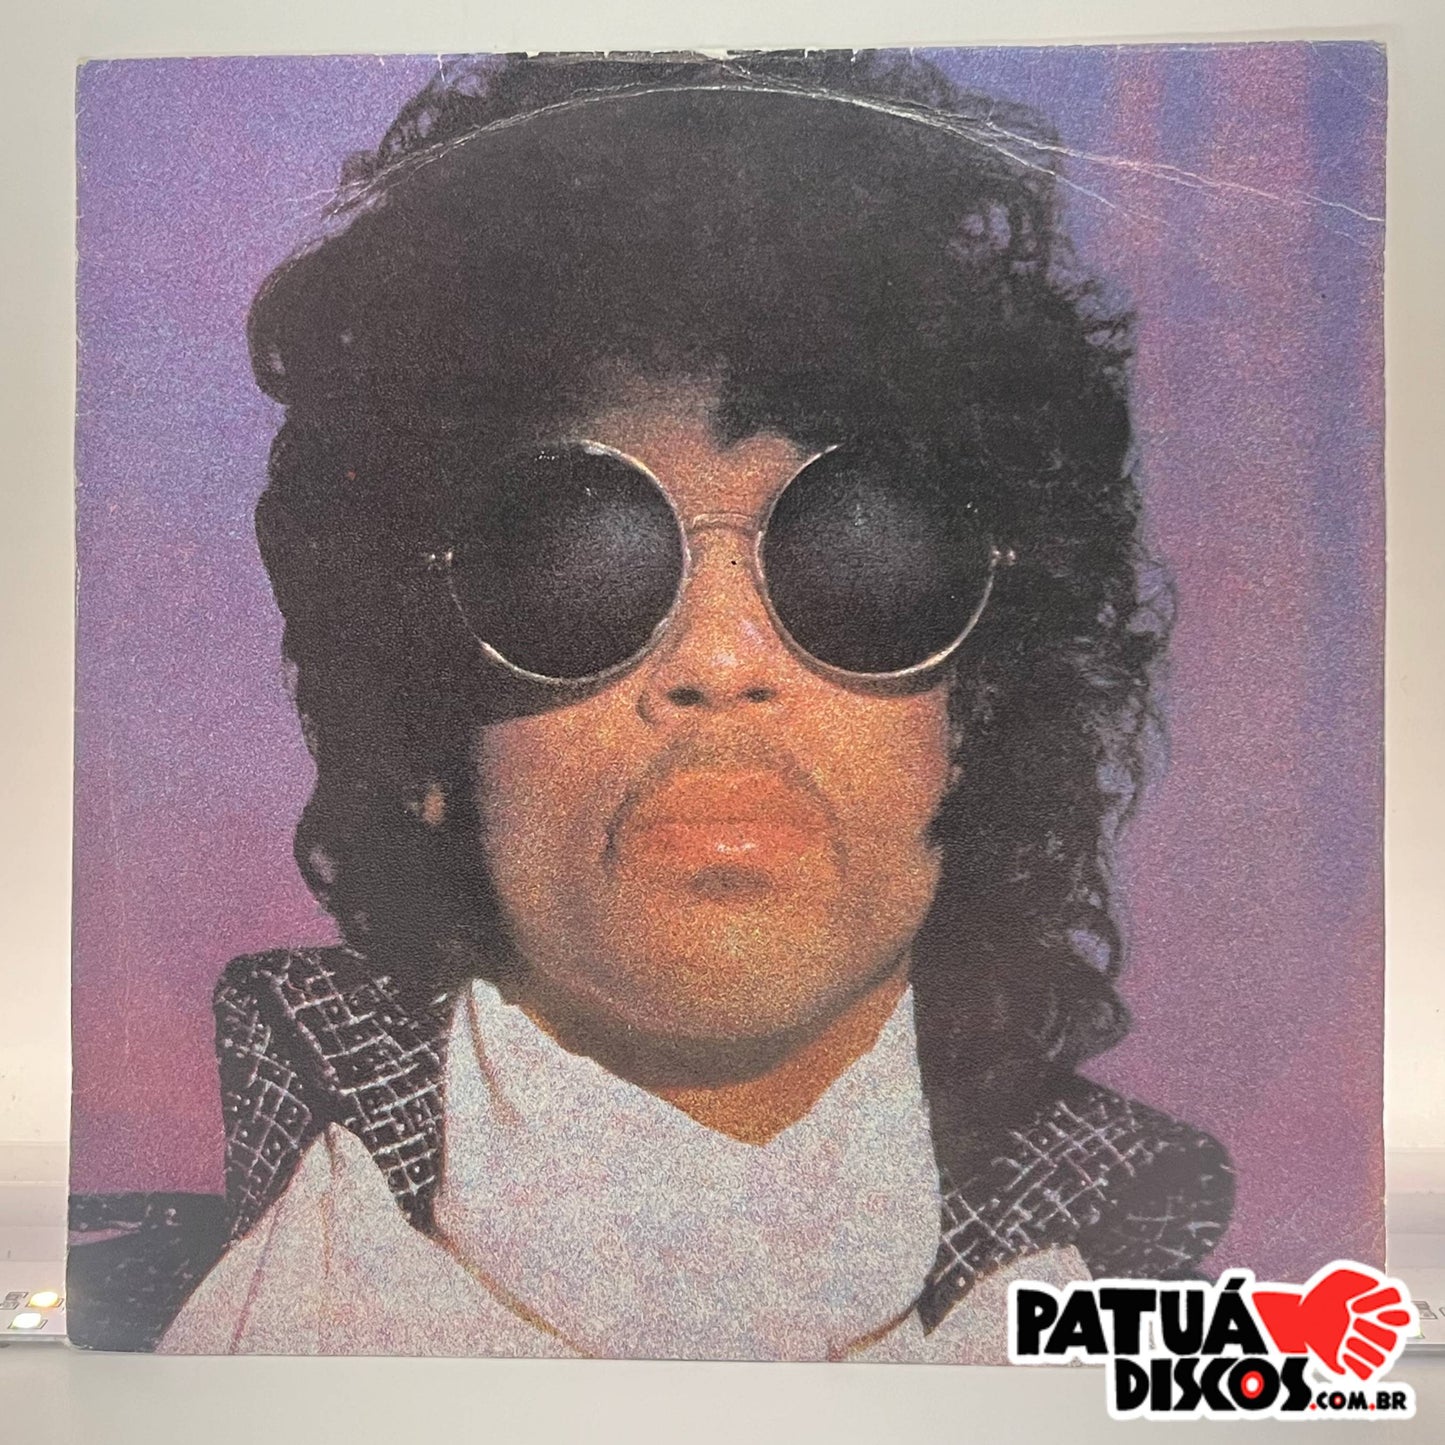 Prince - When Doves Cry - 7"